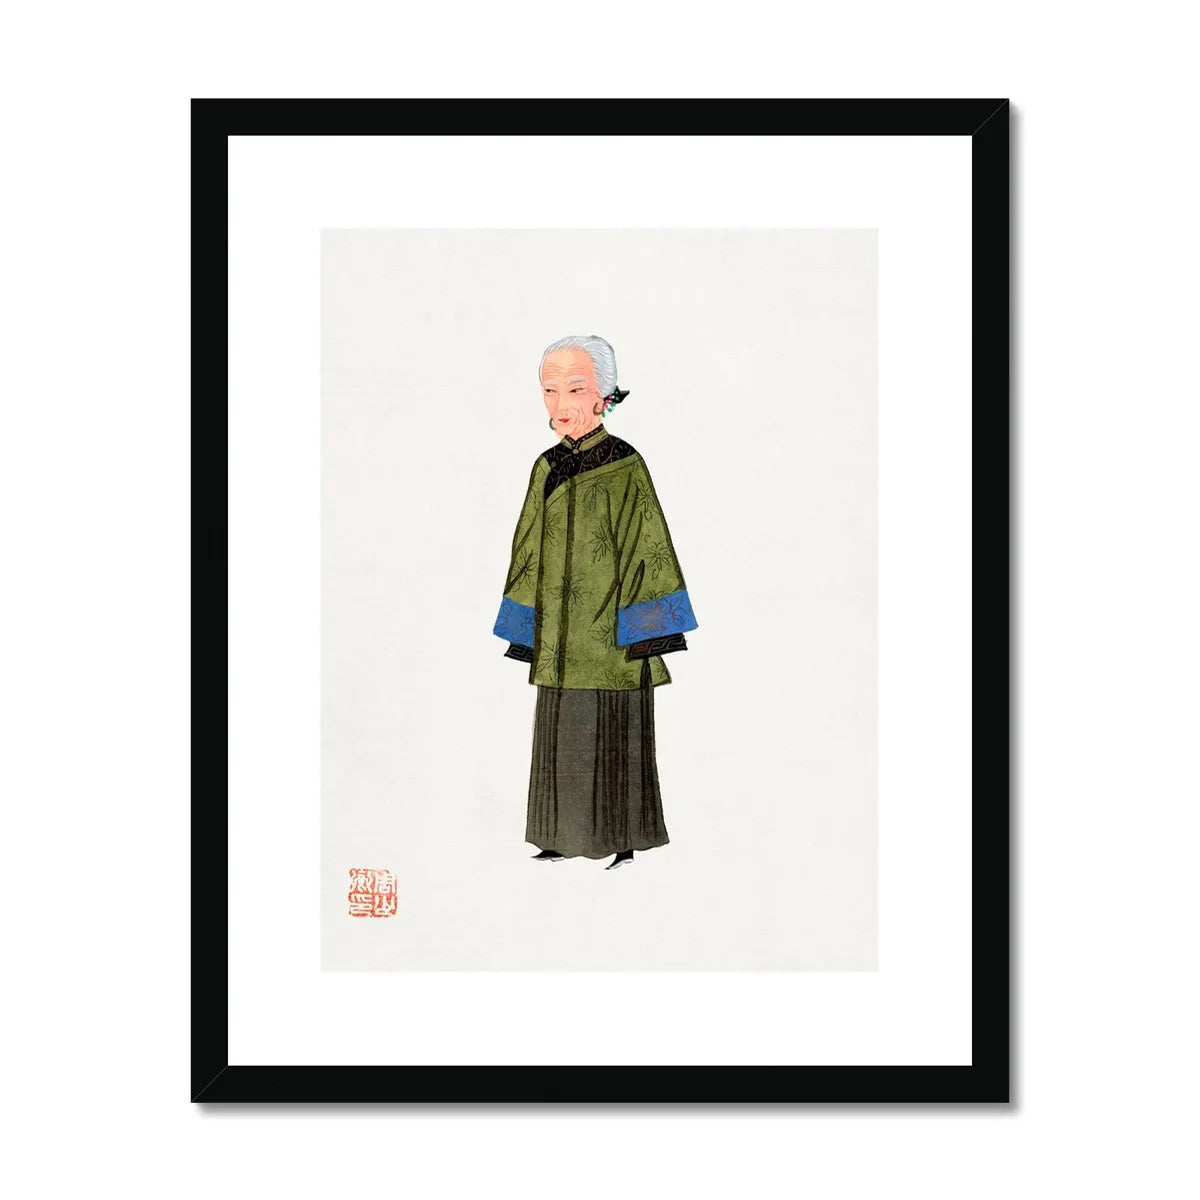 Chinese Grand Dame Framed & Mounted Print - 16’x20’ / Black Frame - Posters Prints & Visual Artwork - Aesthetic Art